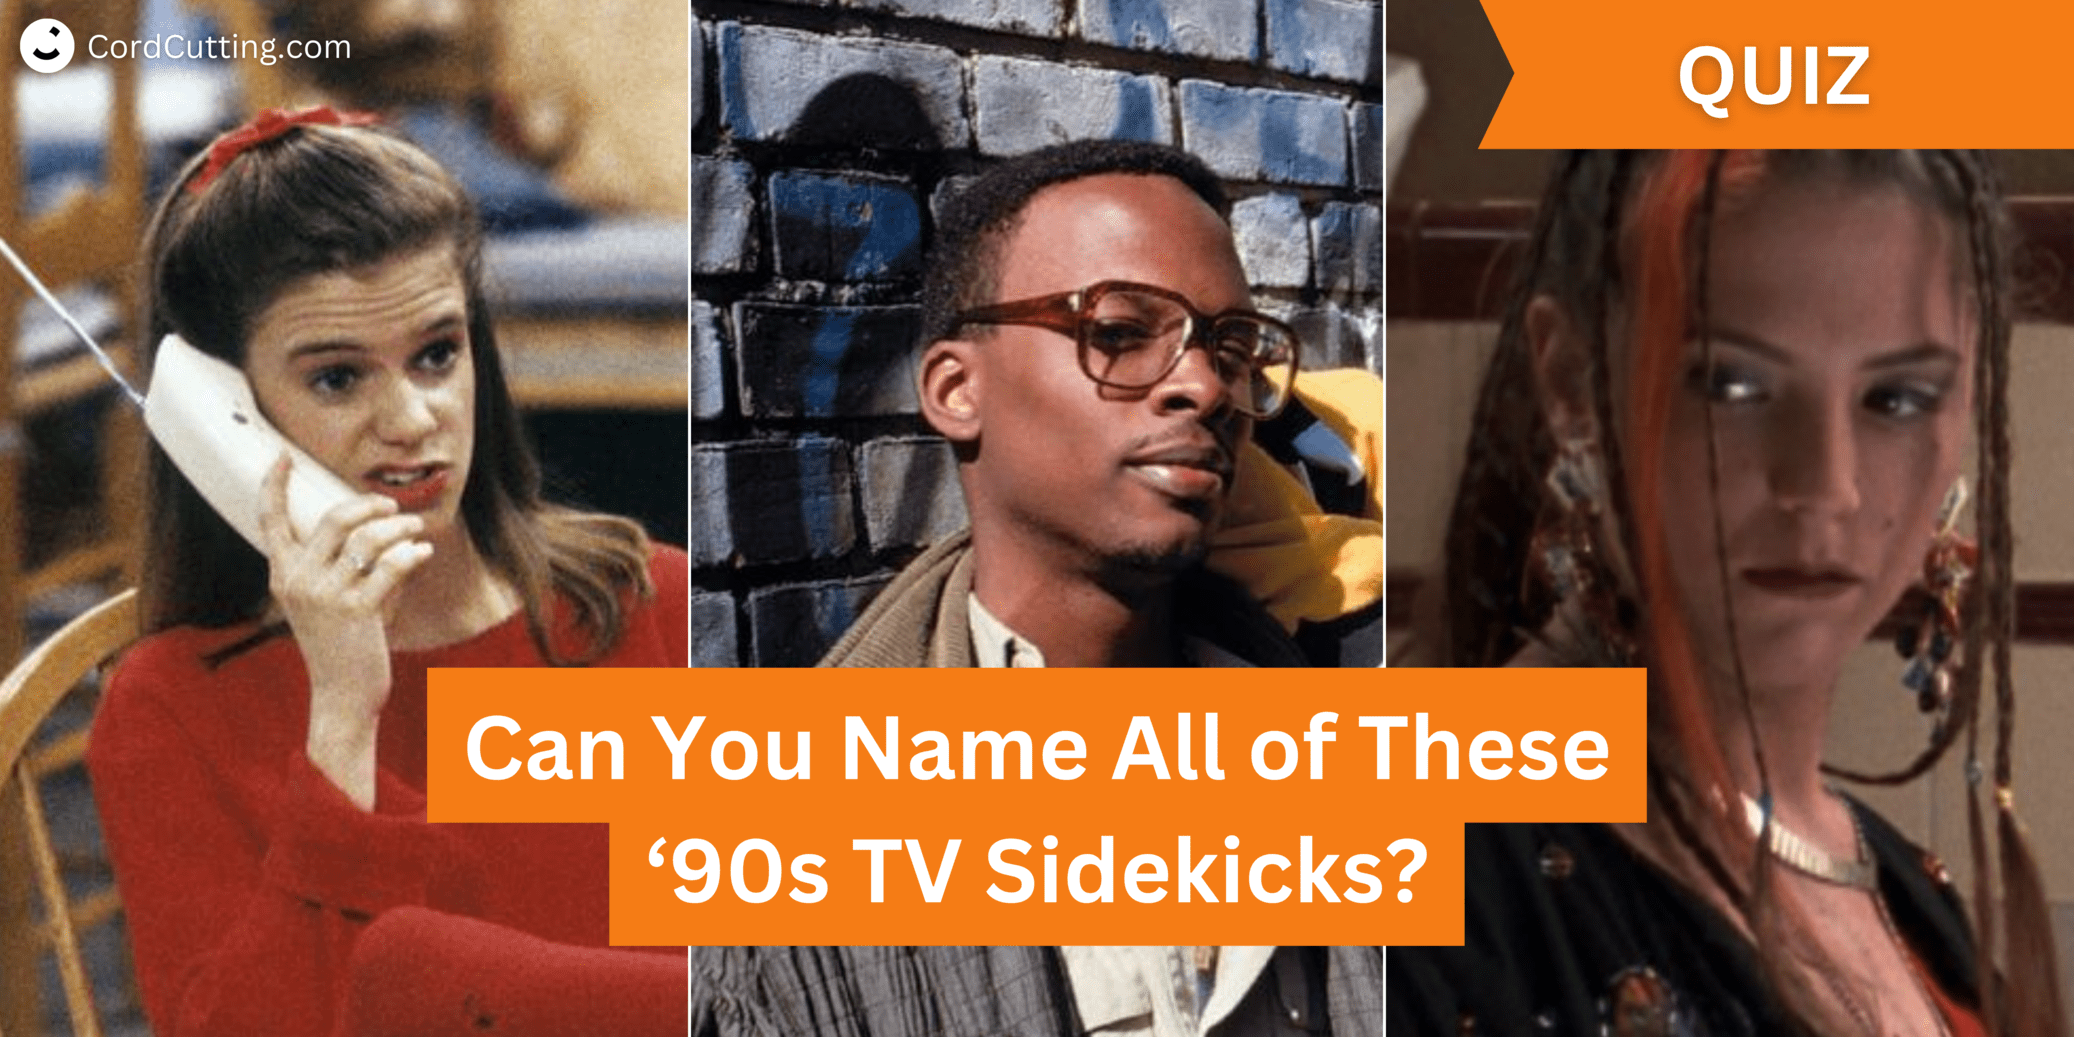 QUIZ: Can You Name All of These ‘90s TV Sidekicks?